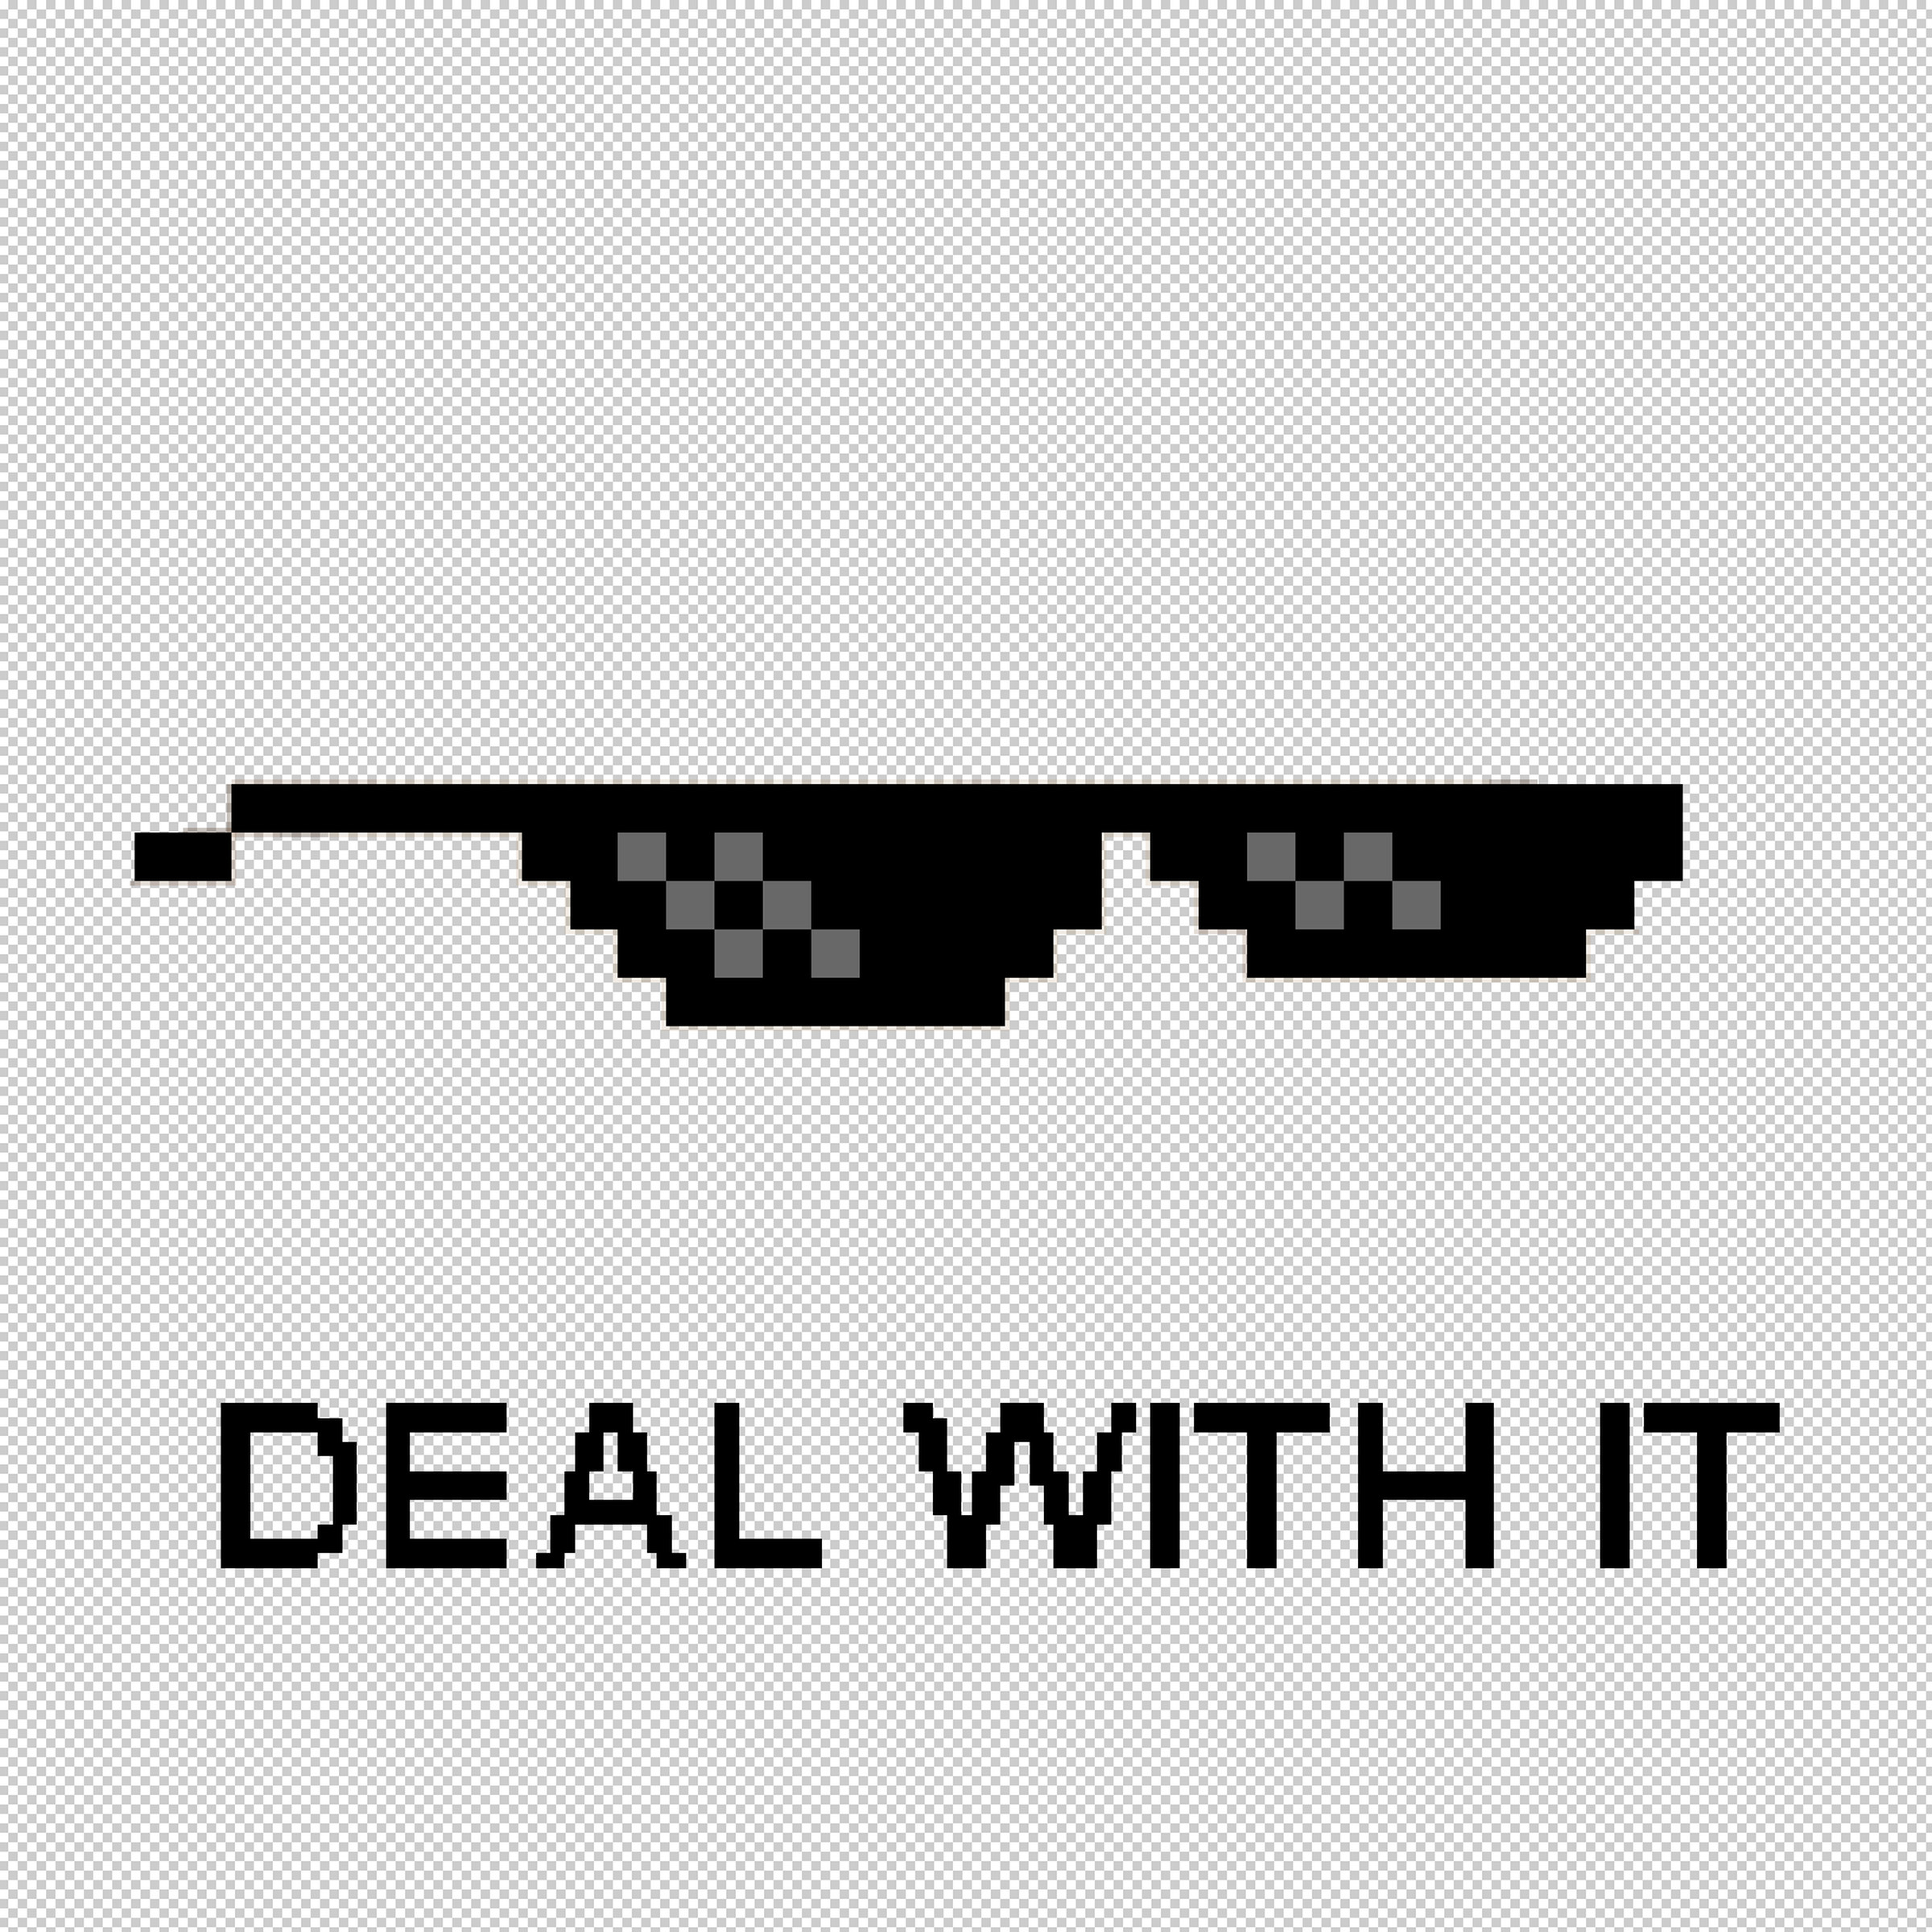 Deal with it glasses and text